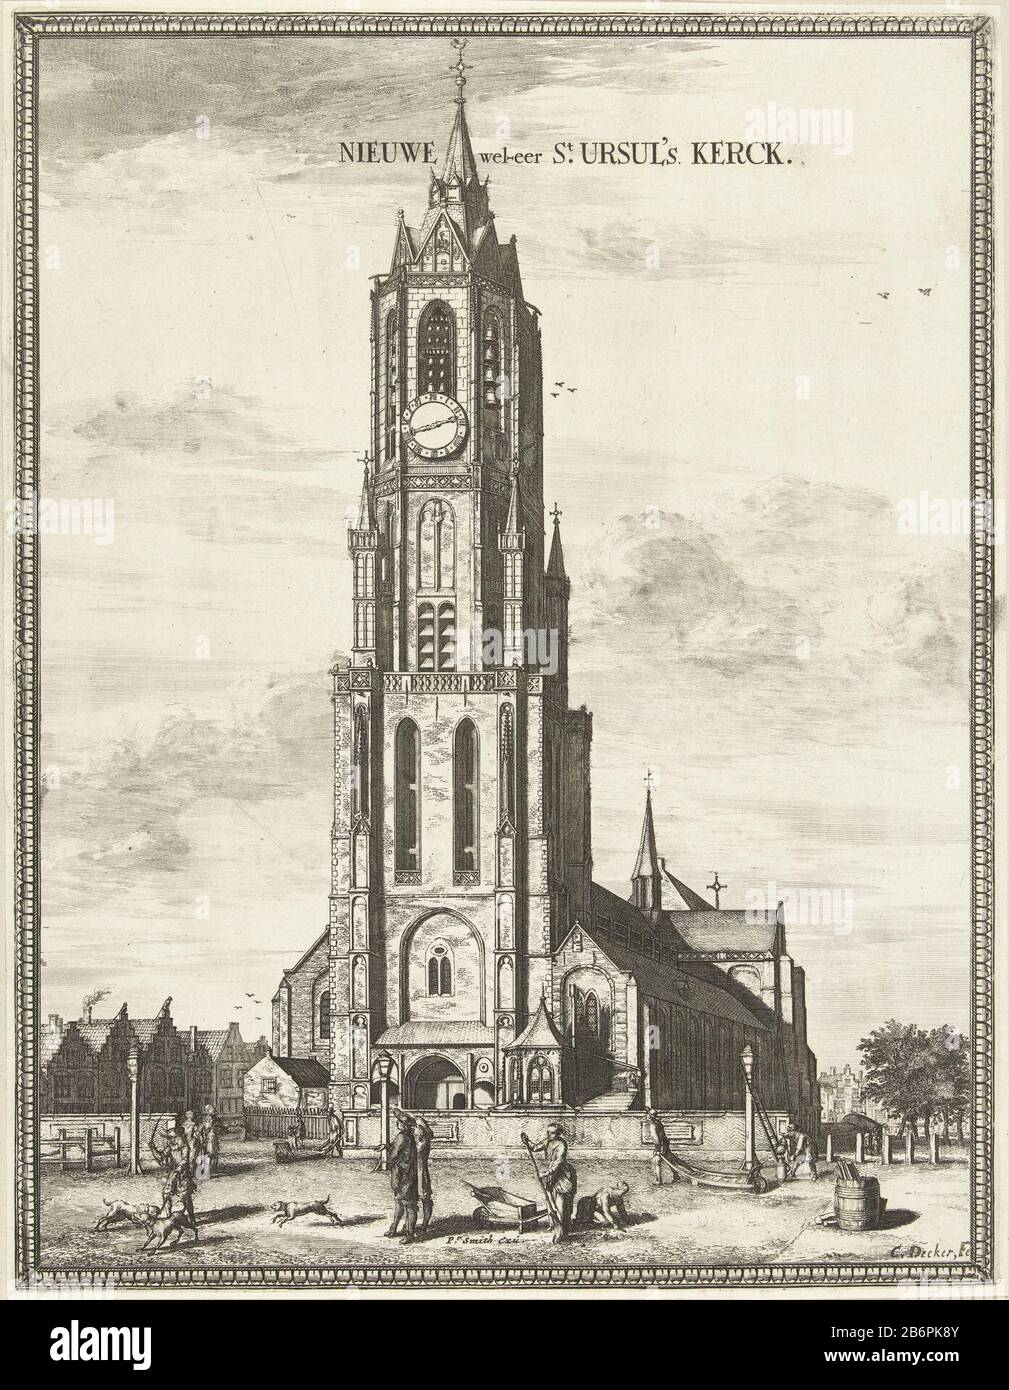 Gezicht op de Nieuwe Kerk te Delft Nieuwe wel-eer St Ursul's Kerck (titel op object) View of the front of the Nieuwe Kerk in Delft. In front of the church figures engaged in work. Before the Reformation, also called the Church of St. Ursulakerk. Manufacturer : printmaker: Coenraet Decker (listed building) Editor: Peter Smith (listed building) Publisher: Arnold Bon (possible) Publisher: Pieter Mortier (I) (possibly) publisher: Reinier Boitet (possible) Place manufacture: printmaker: Amsterdam Publisher: Amsterdam Publisher: Delft Publisher: Amsterdam Publisher: Delft Dating: 1678 - 1729 Materia Stock Photo